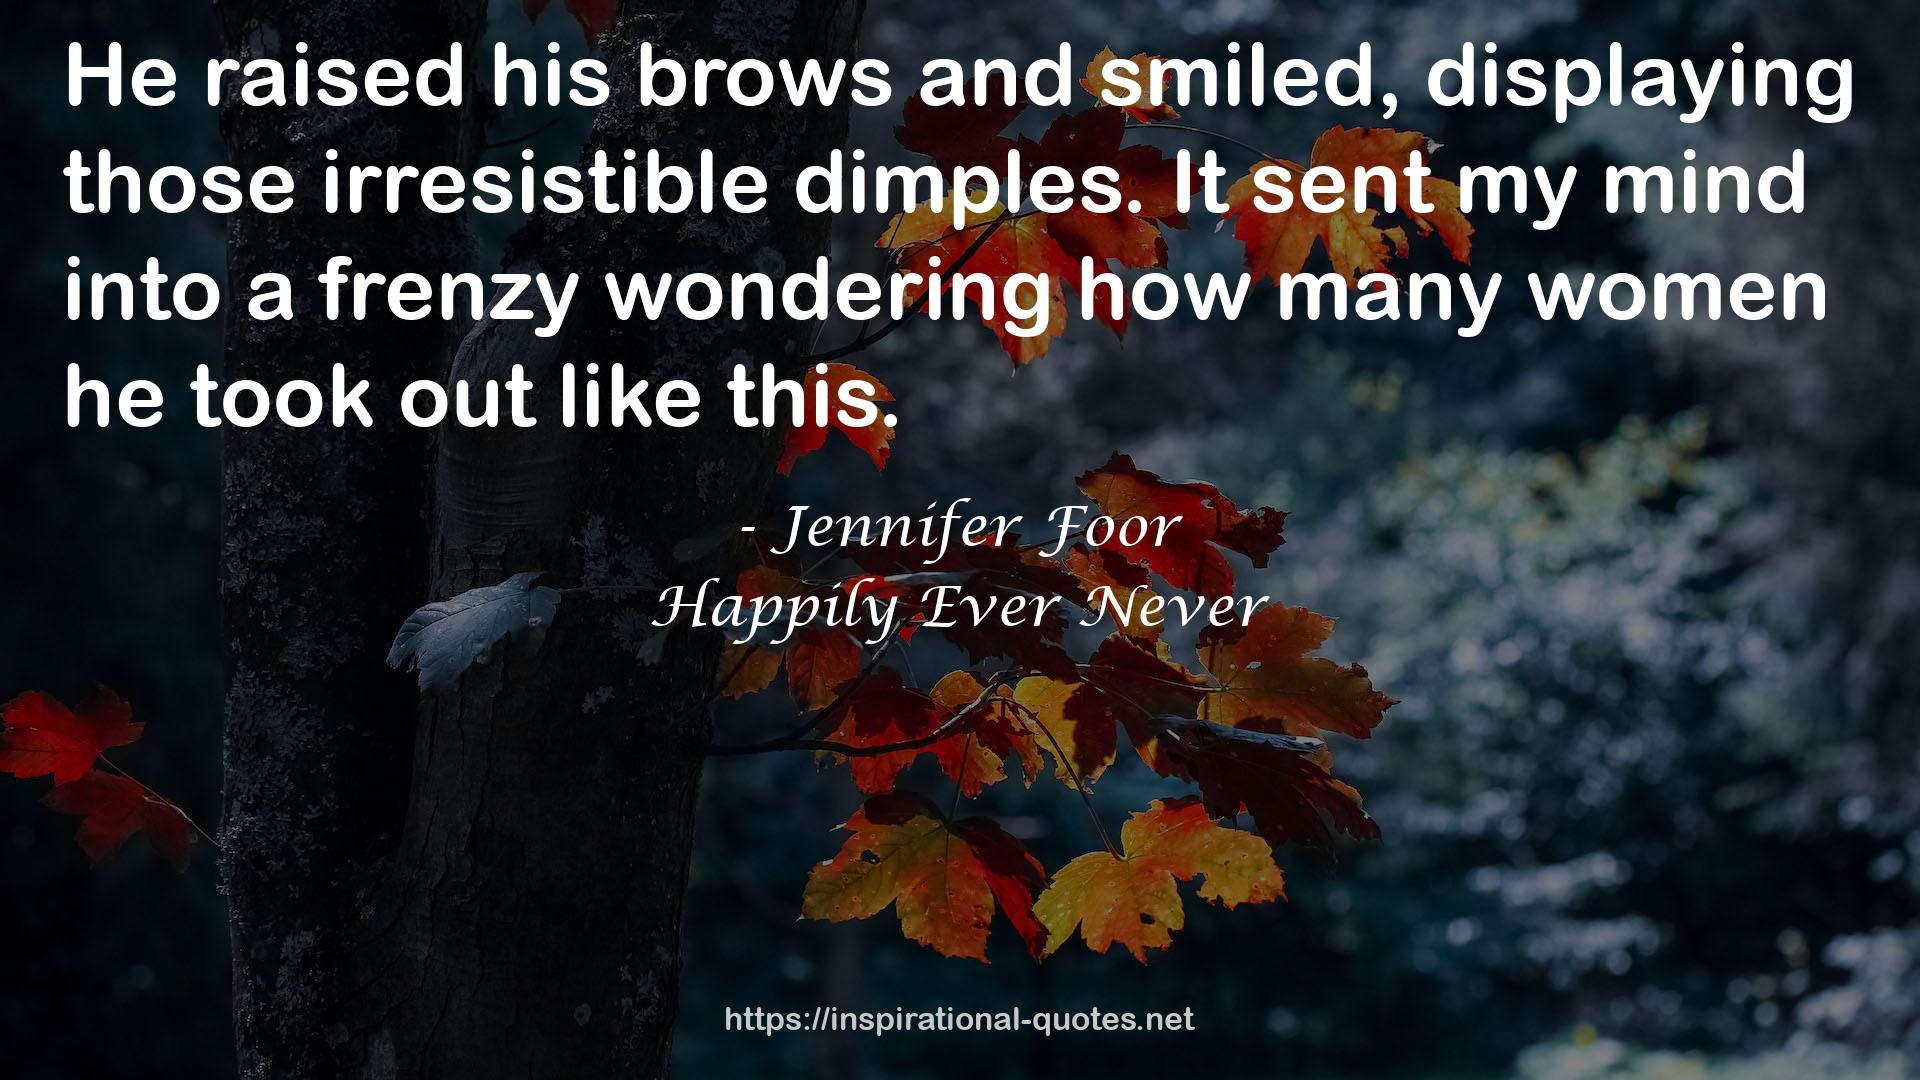 Happily Ever Never QUOTES